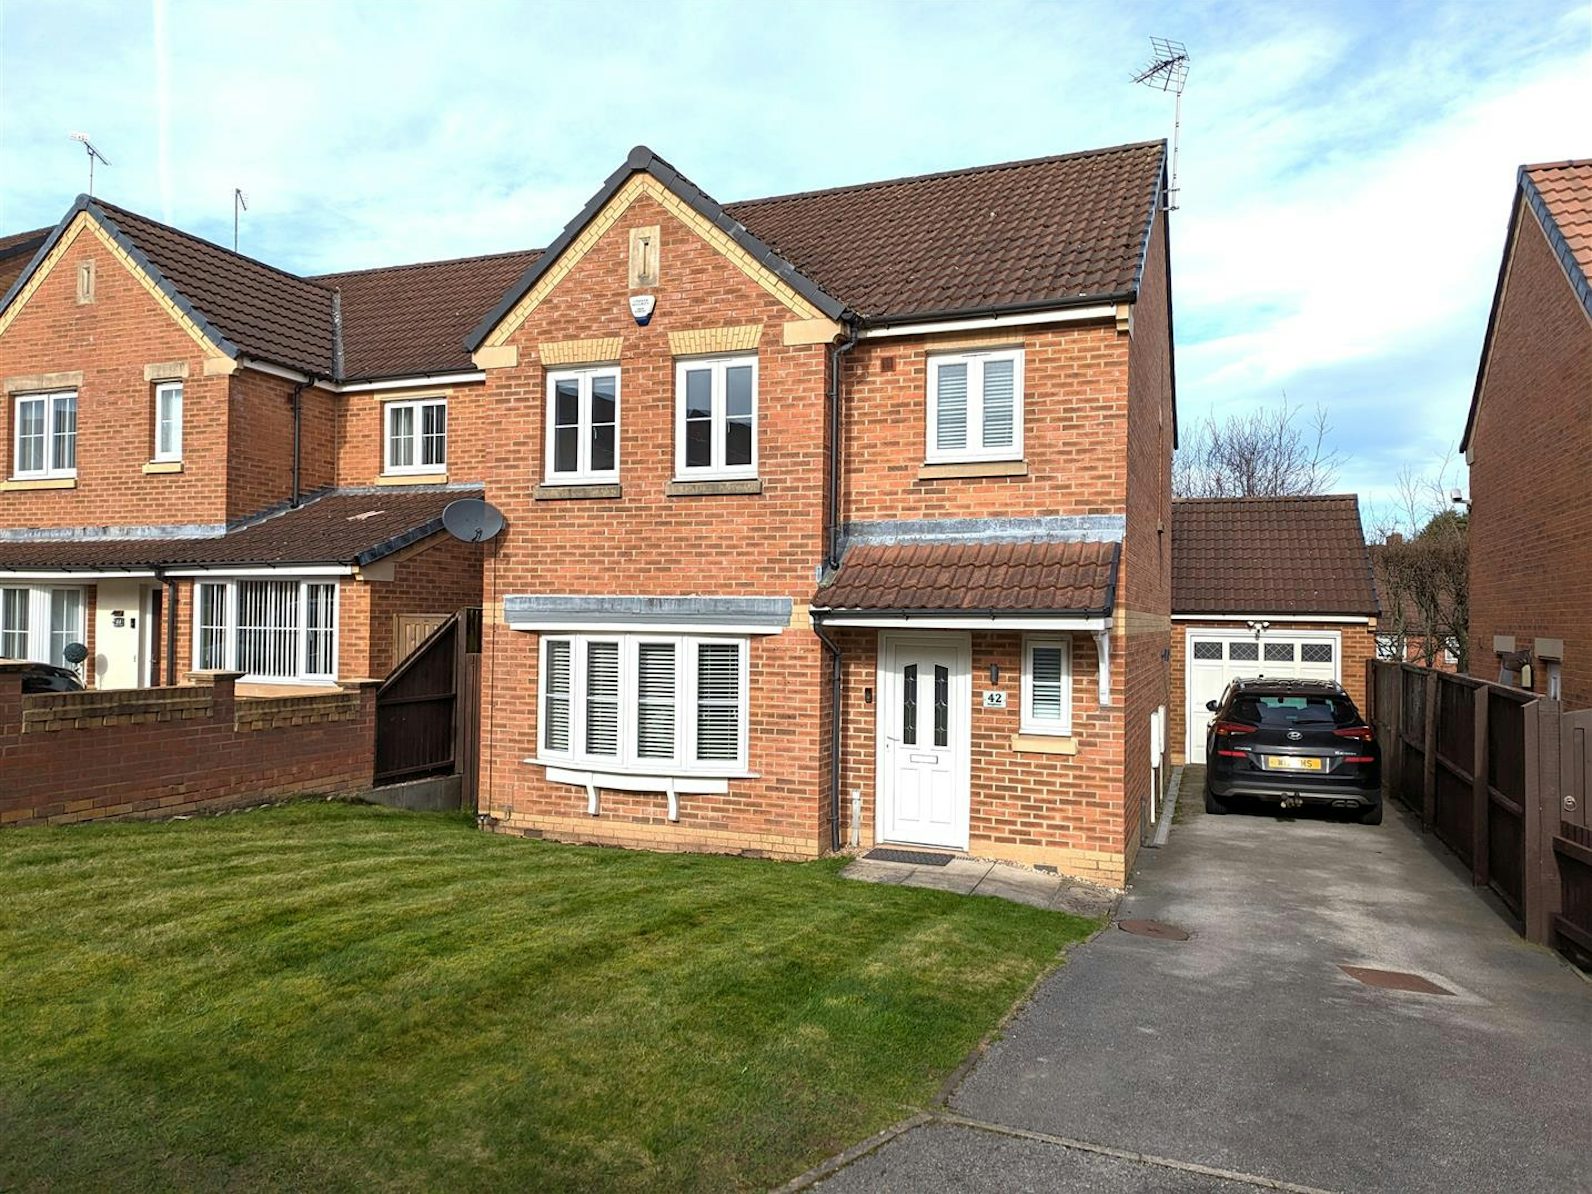 Detached house for sale on Kingfisher Road Mansfield, NG19